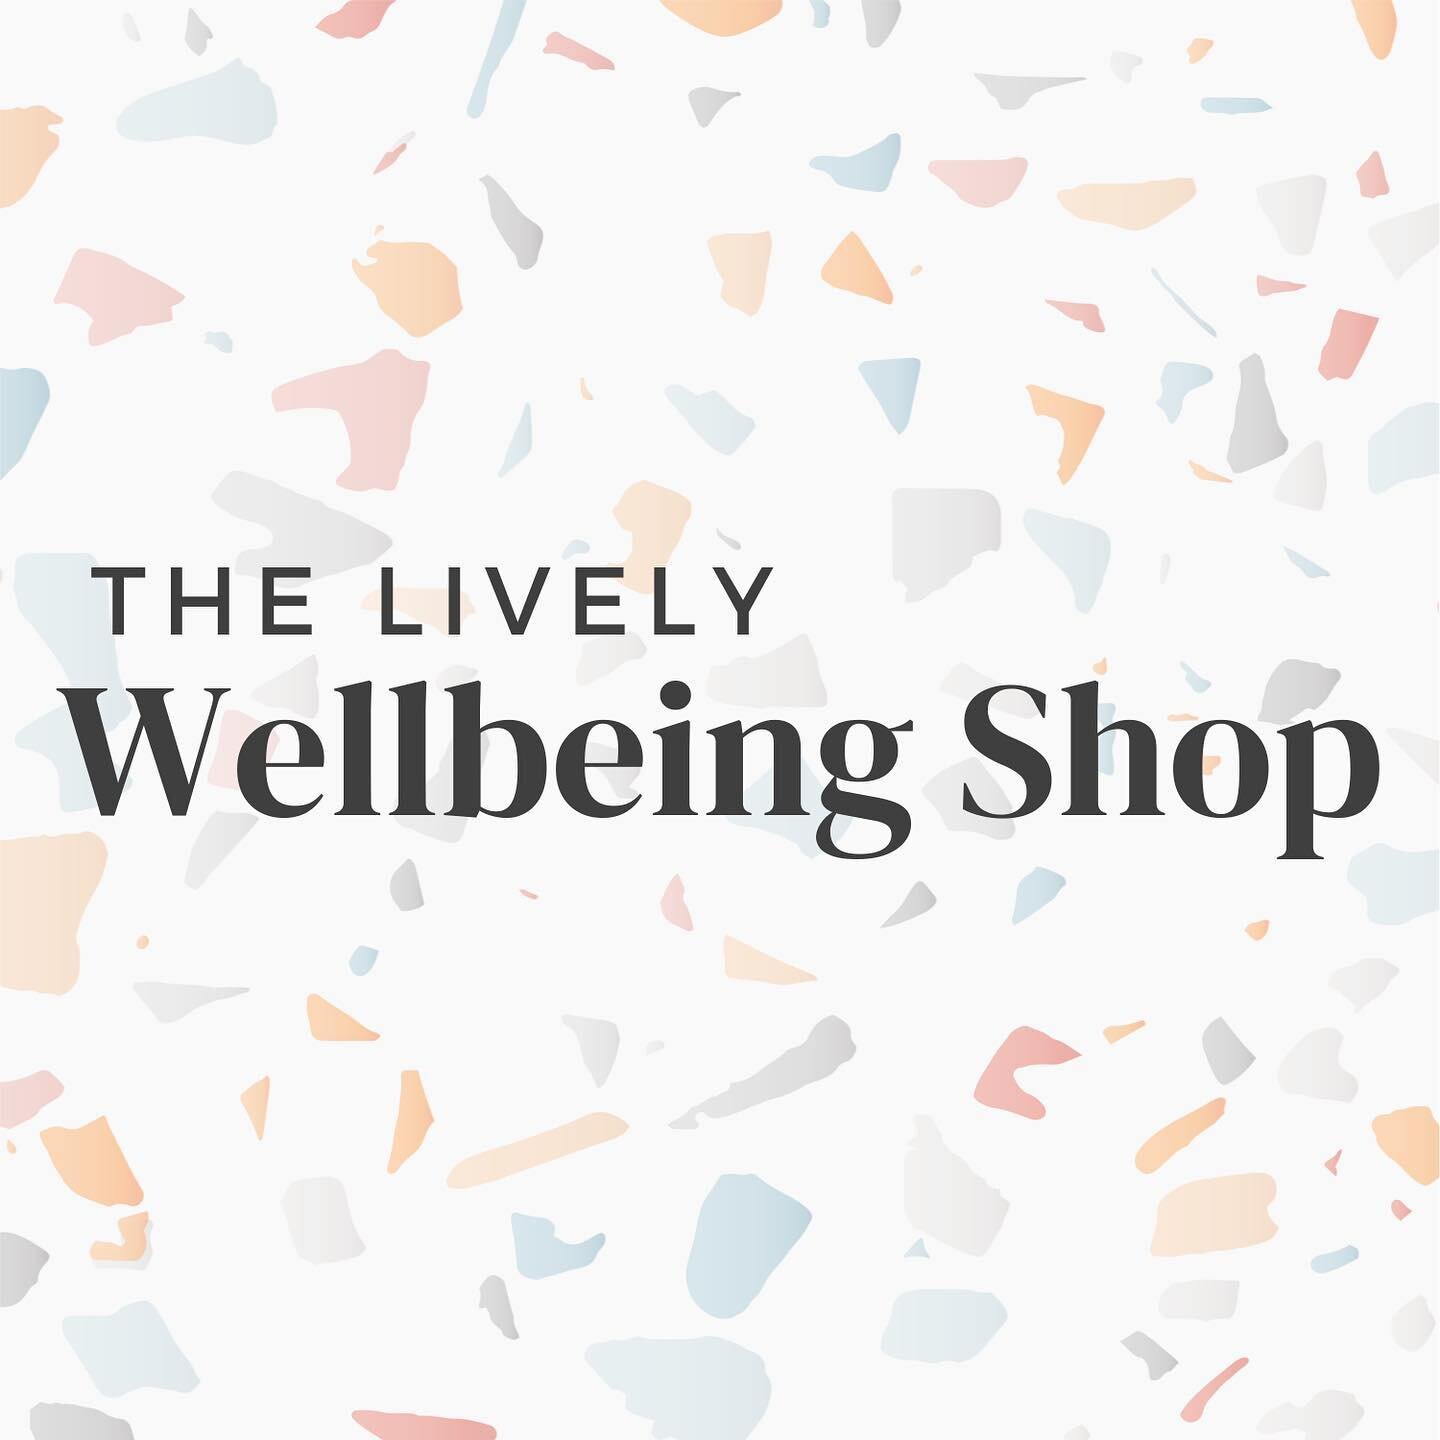 The Wellbeing Shop will be a curated list of products created by small business owners for purchase! All proceeds will go to the Lively Community Foundation&rsquo;s programming whose mission is to promote mental &amp; emotional wellbeing in all commu